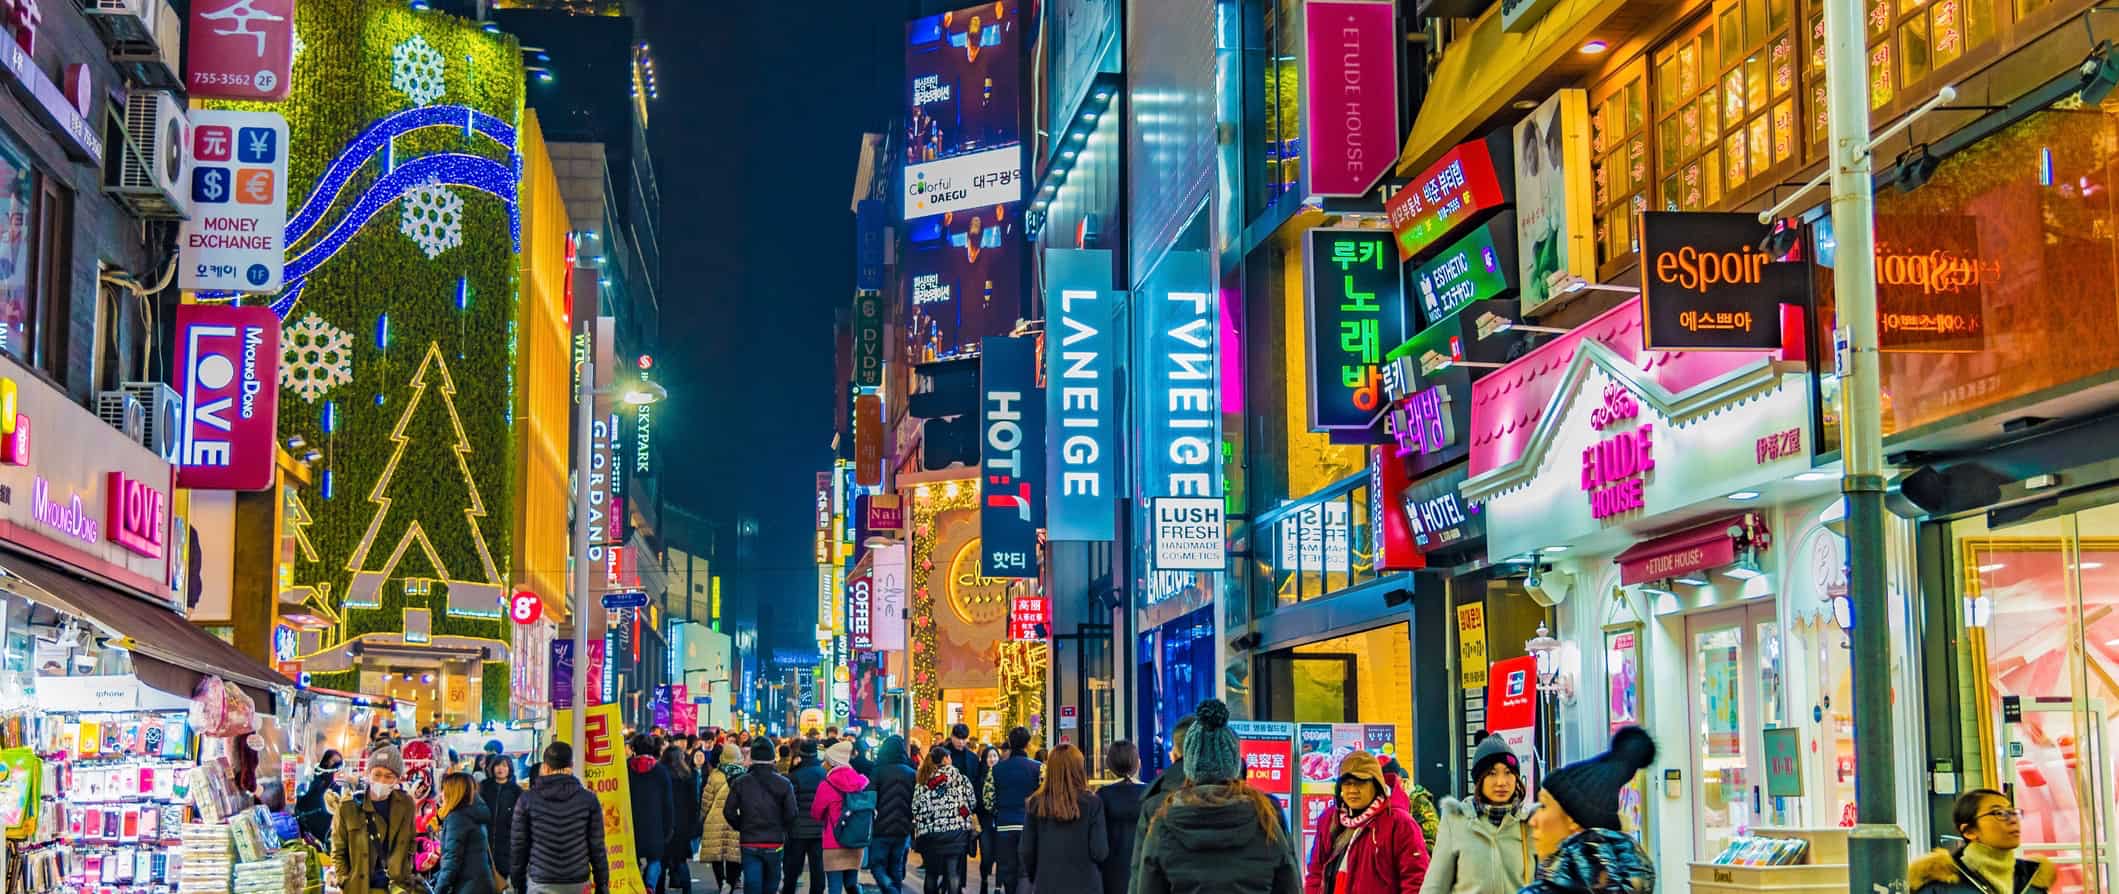 Locals and tourists on a busy street in Seoul Korea at night with lots of bright signs